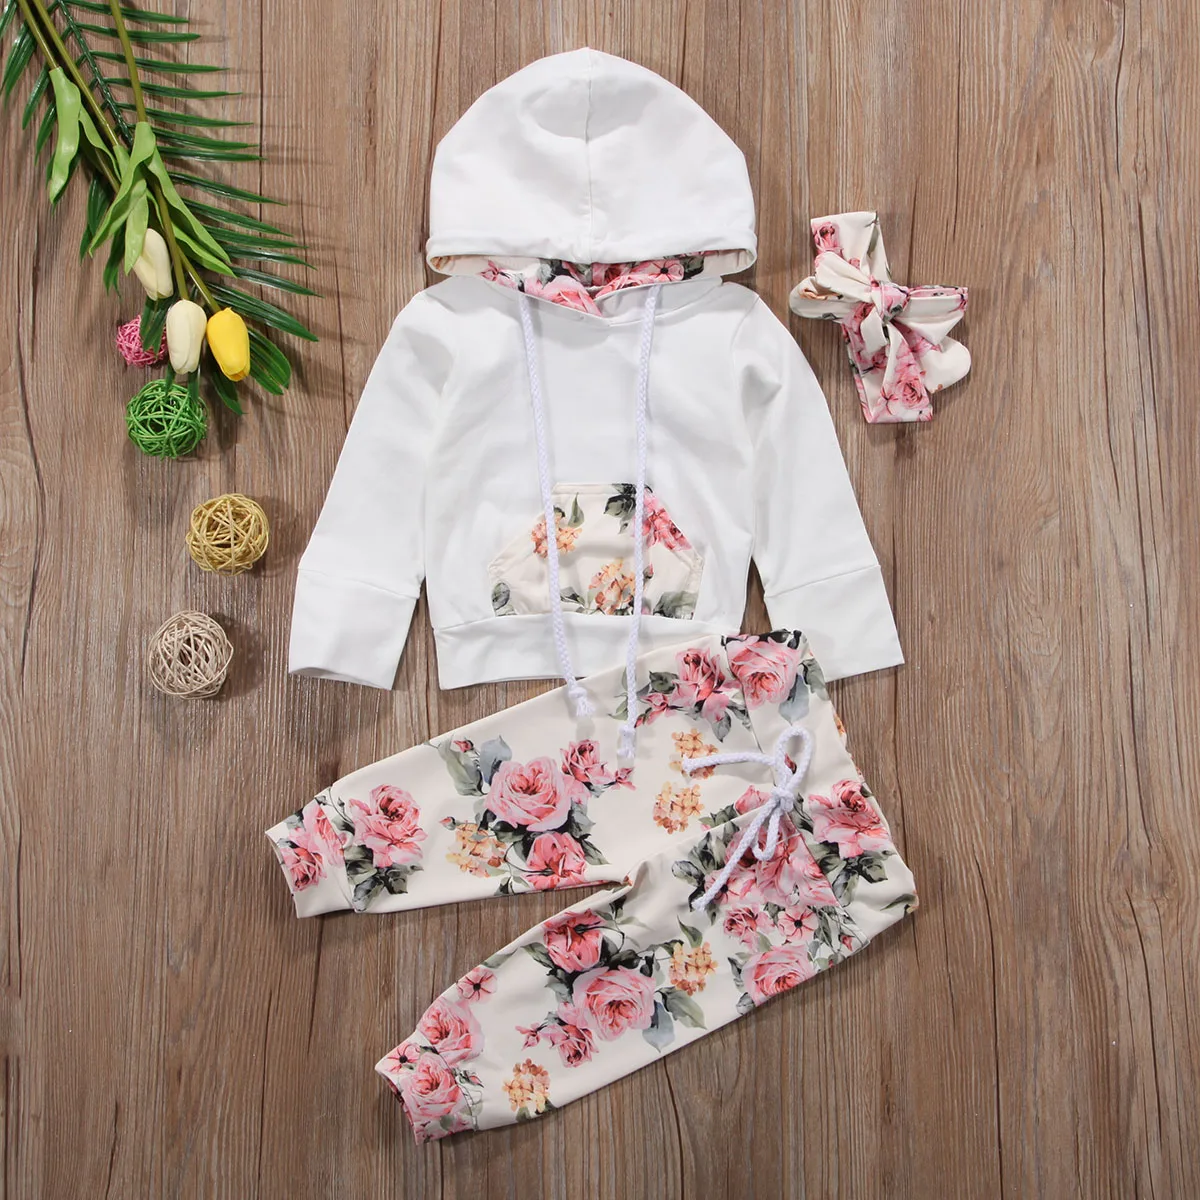 Newborn Baby Girls Clothes Hooded Tops Pants Floral Outfits Set Infant Tracksuit 